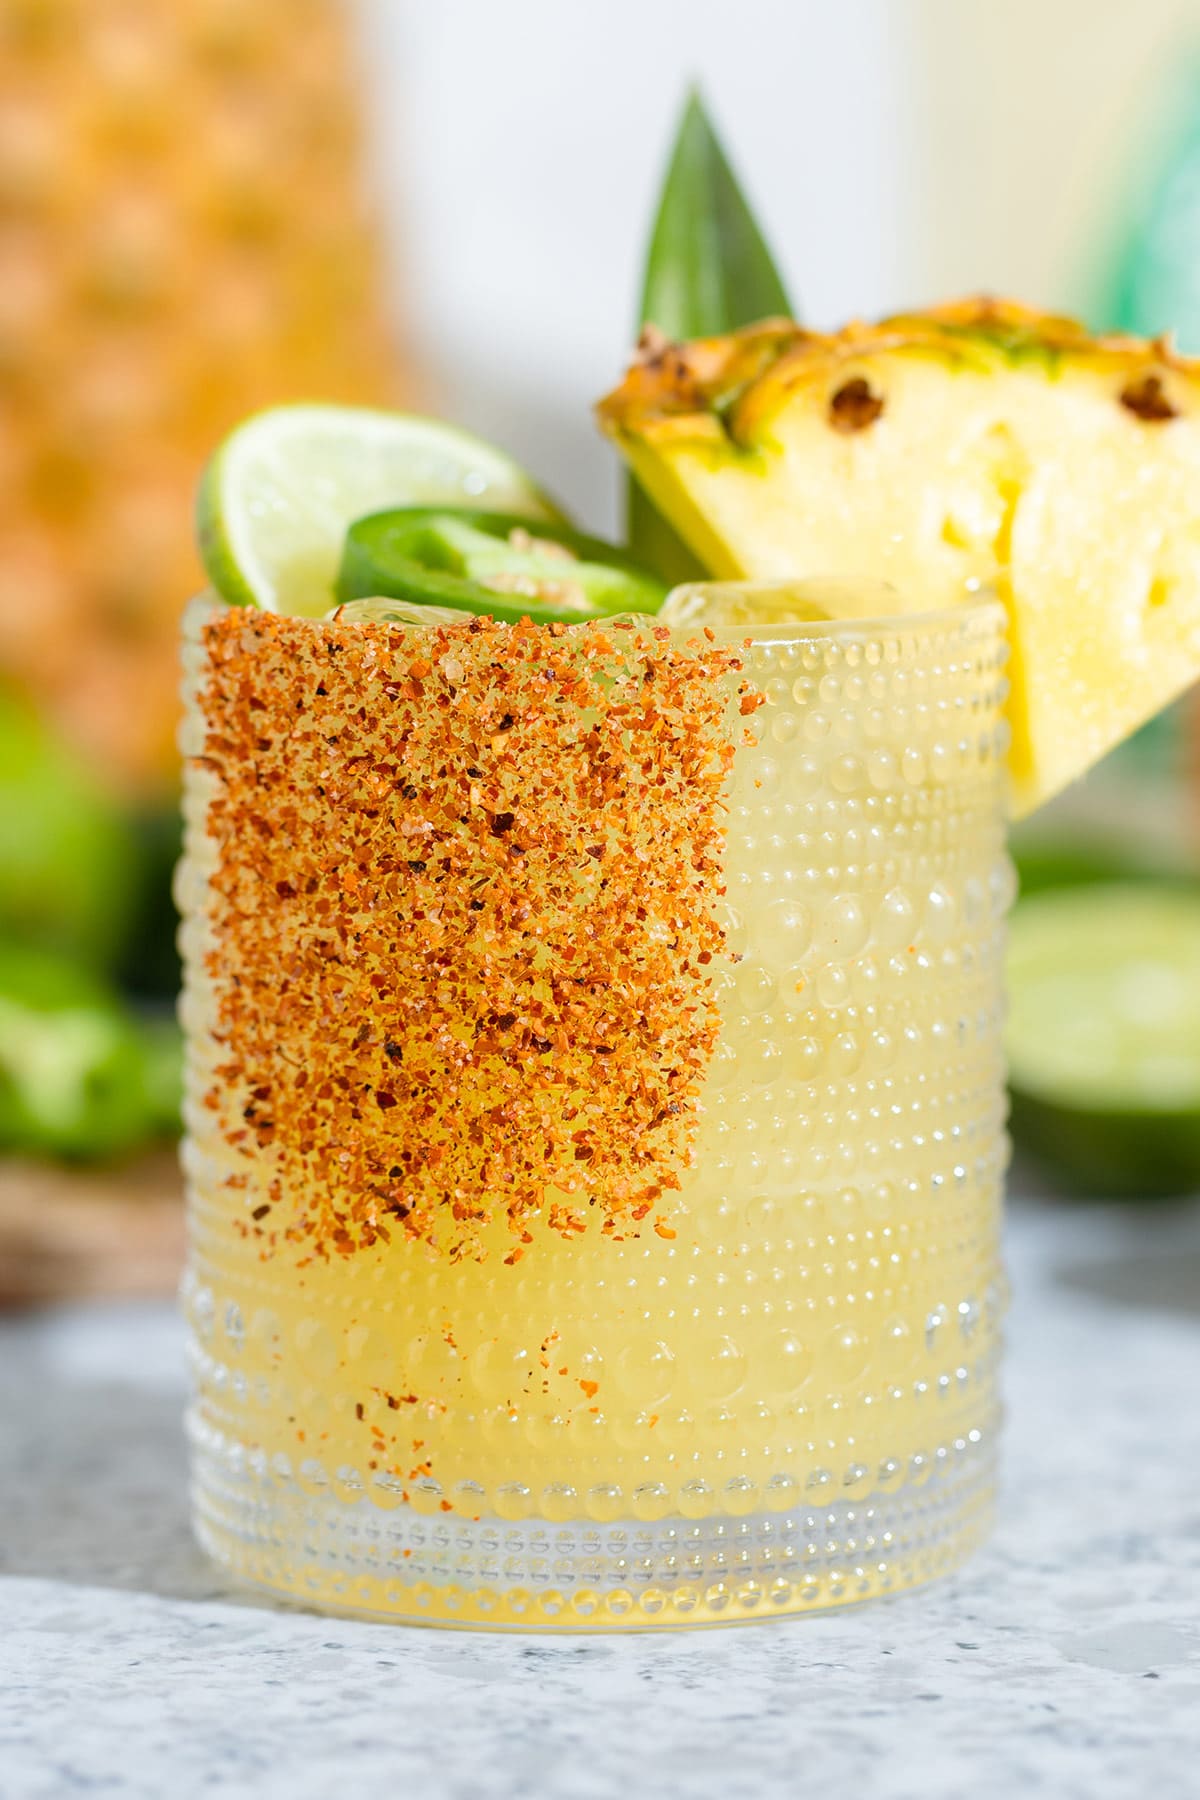 Bright yellow margarita in a short glass garnished with tajin, a wedge of pineapple, a slice of lime, and a slice of jalapeno.